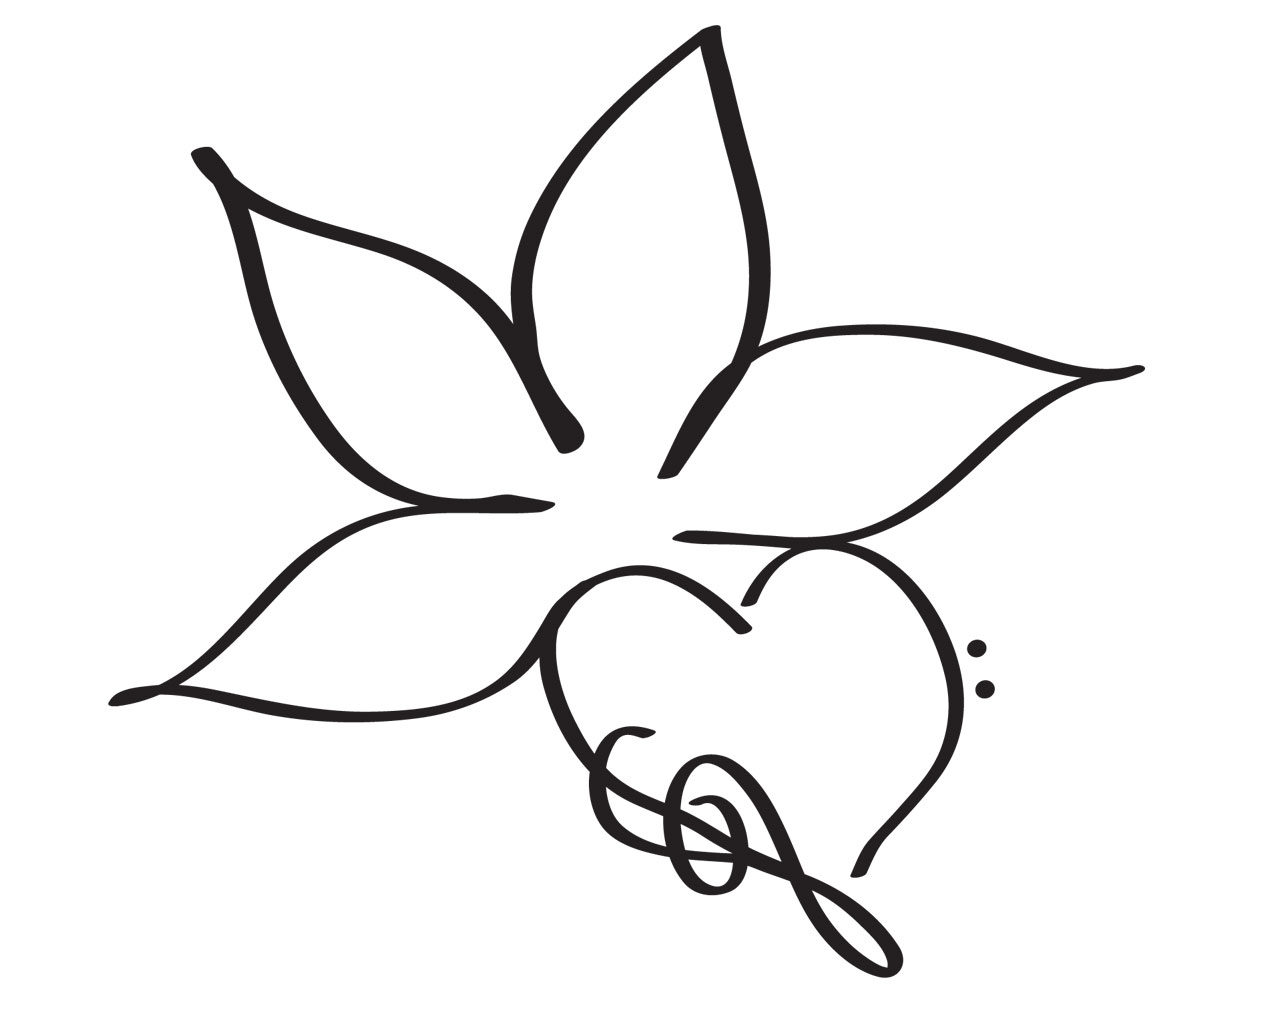 Simple Flower SketchGallery of Home Design, And More. | Gallery of ...